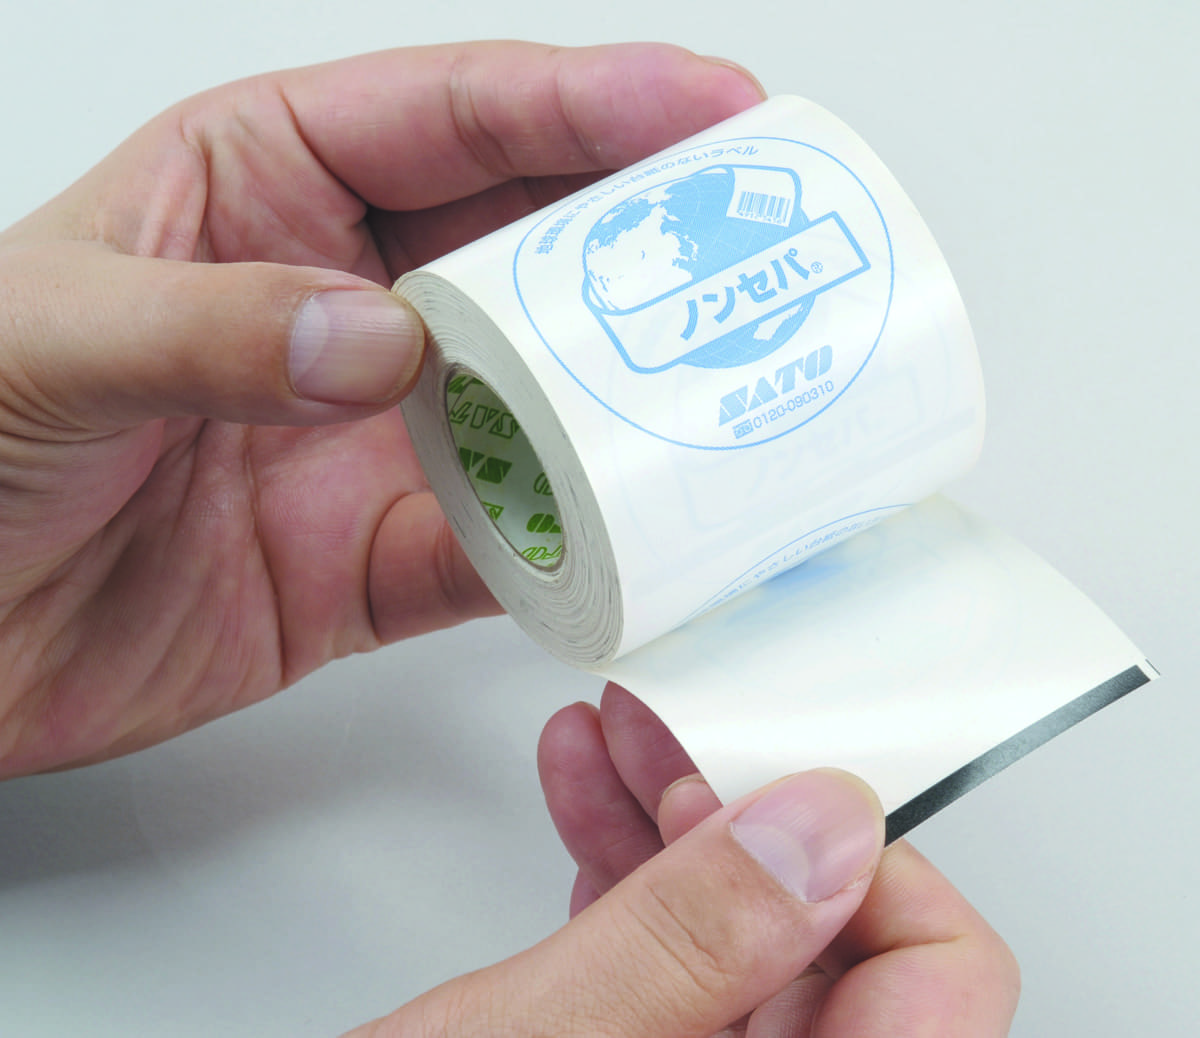 ST005479 - Linerless labels roll in hand